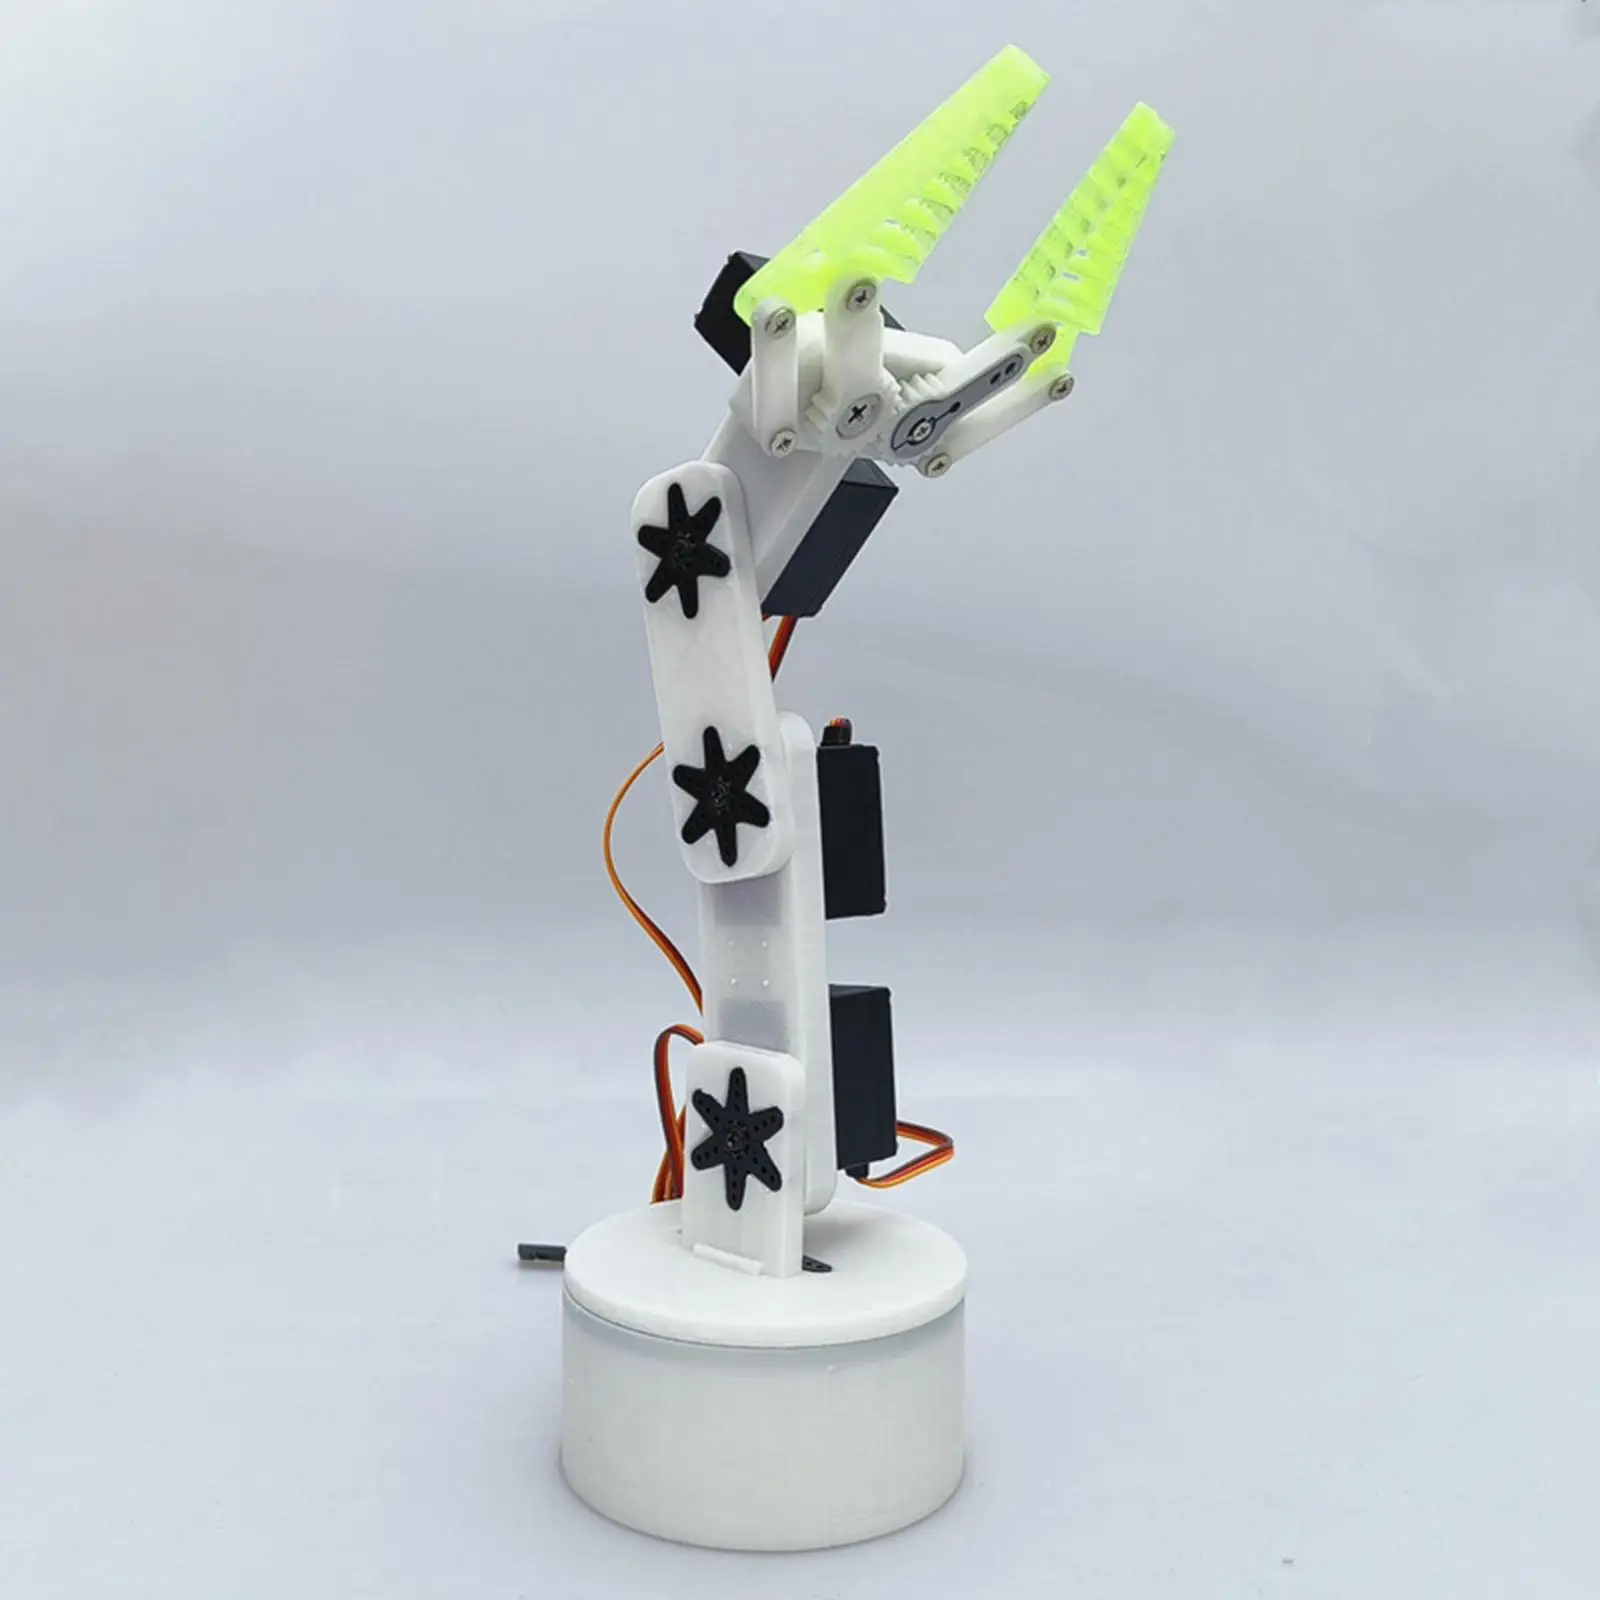 Robot Arm Building Kit Manipulator Electronics Science Toy for Teens, Kids